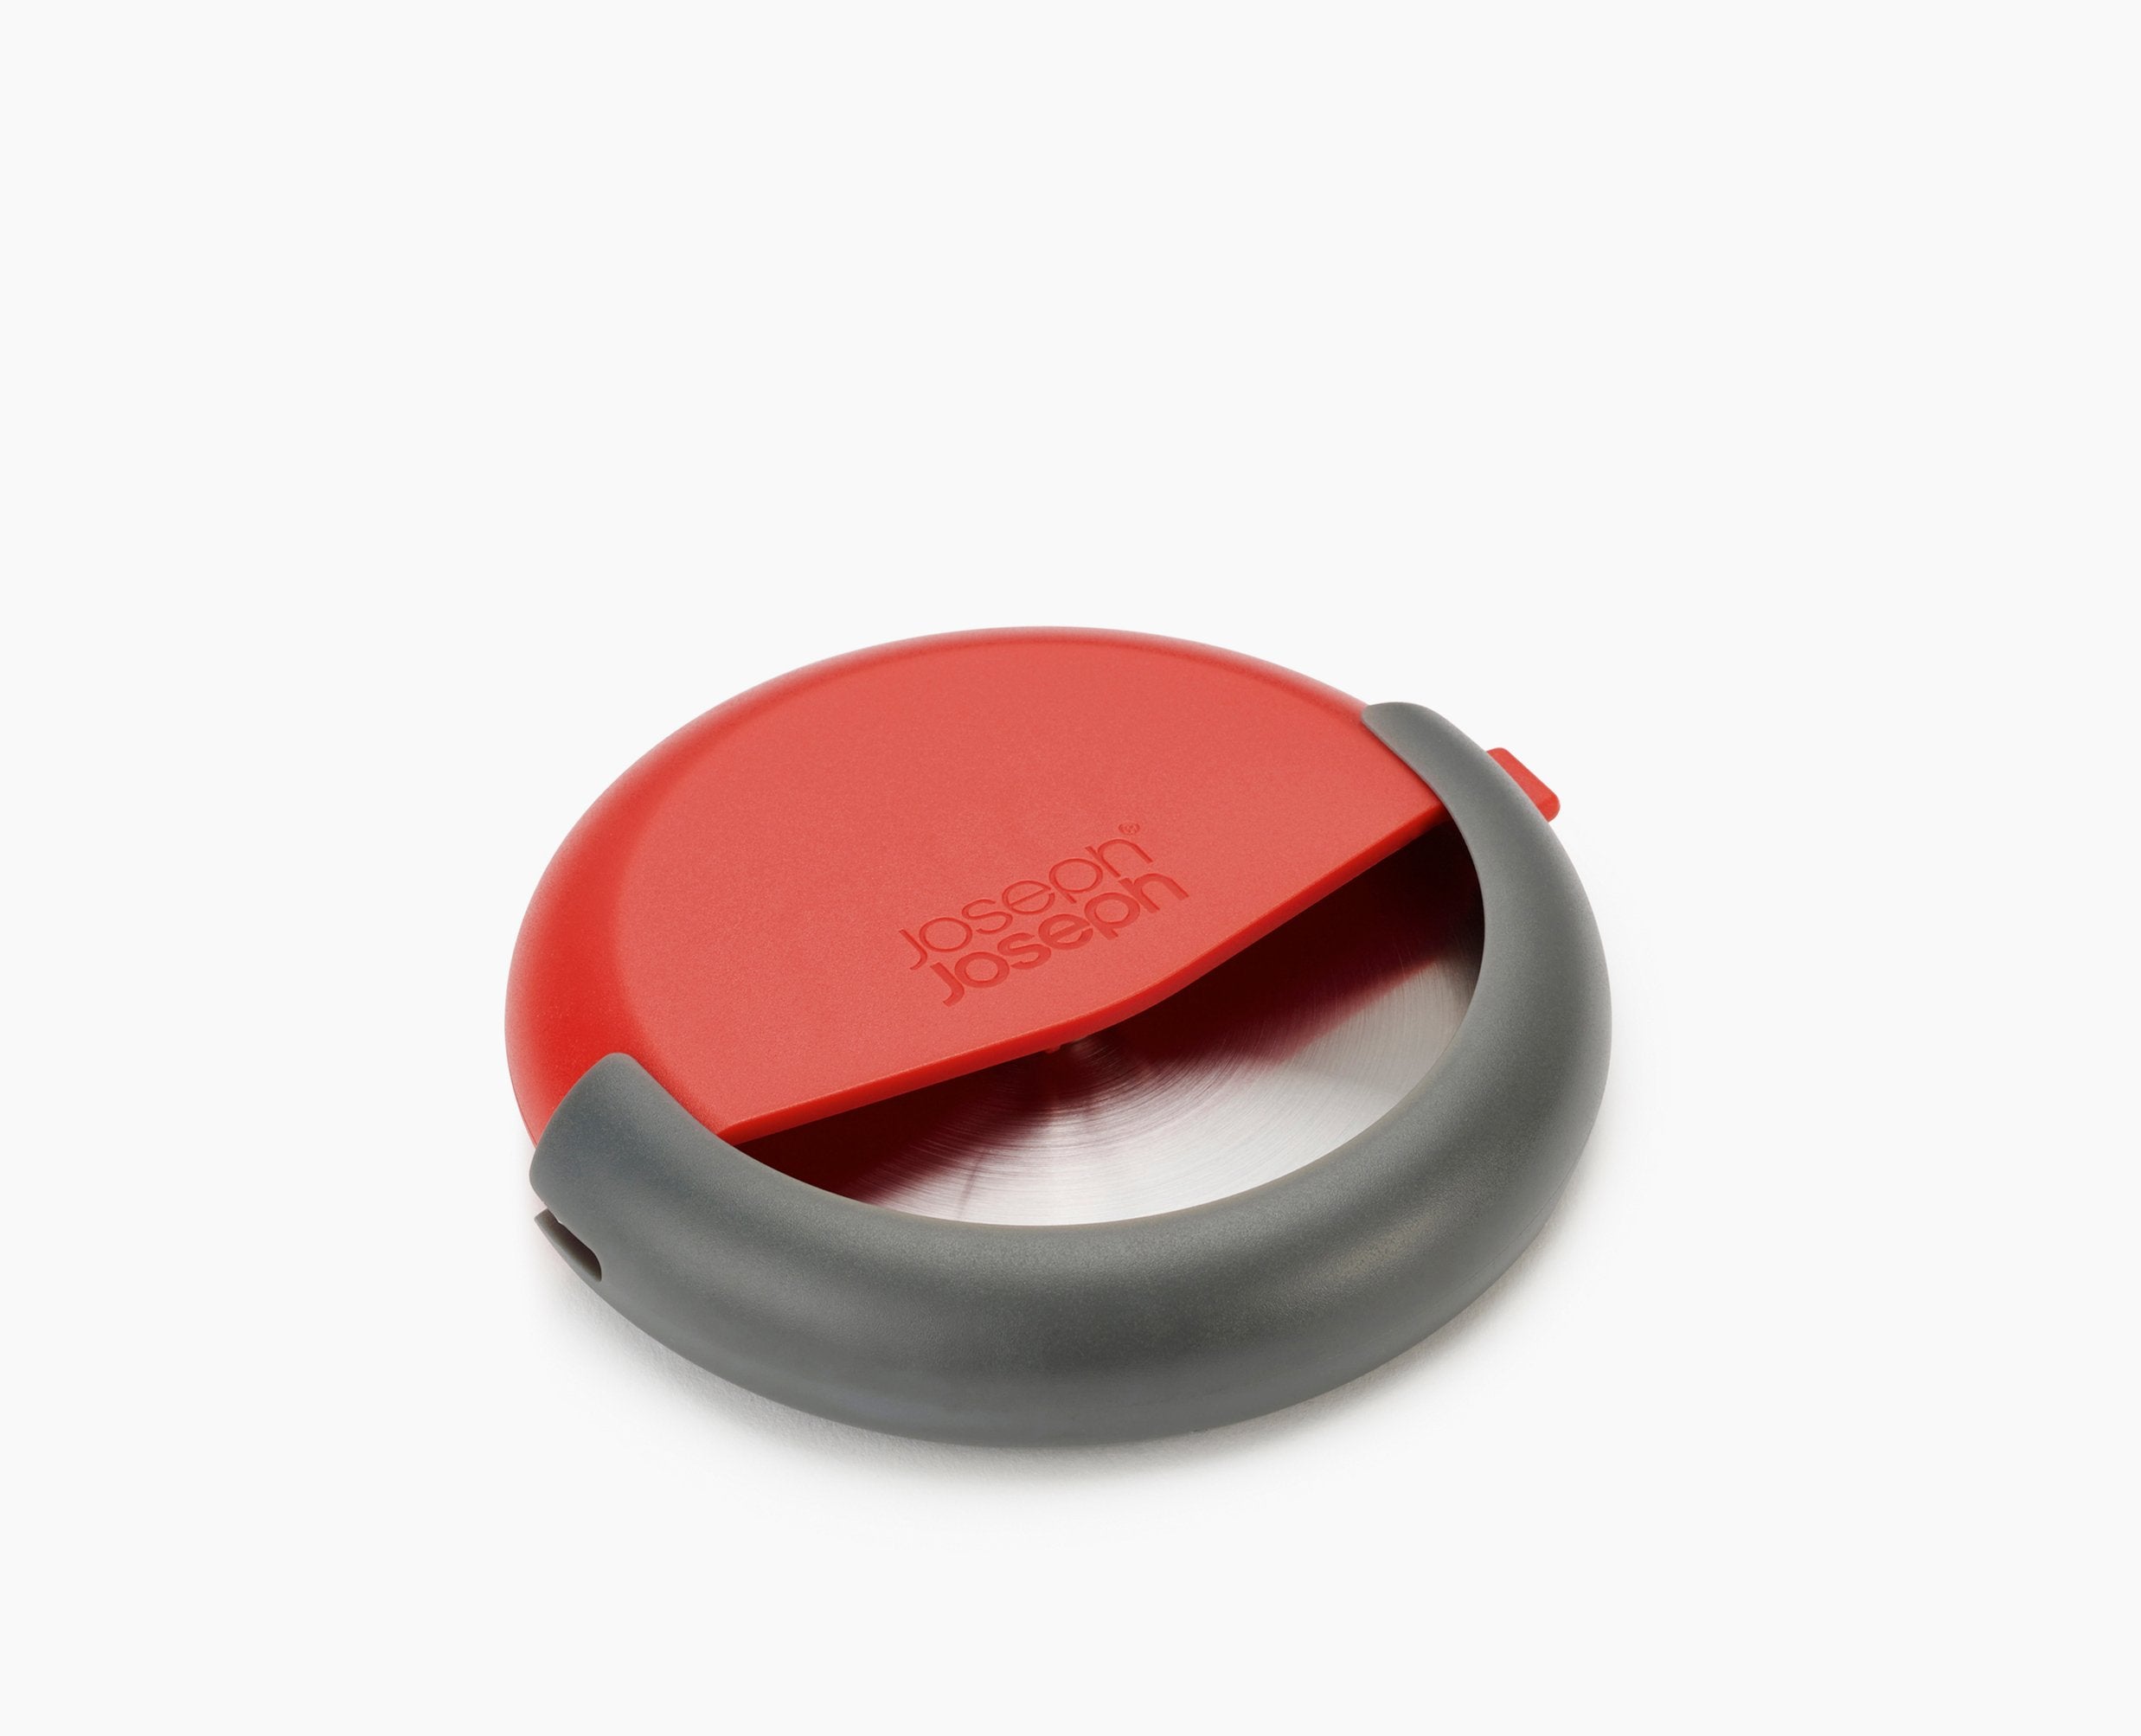 Duo Pizza Cutter - Image 1